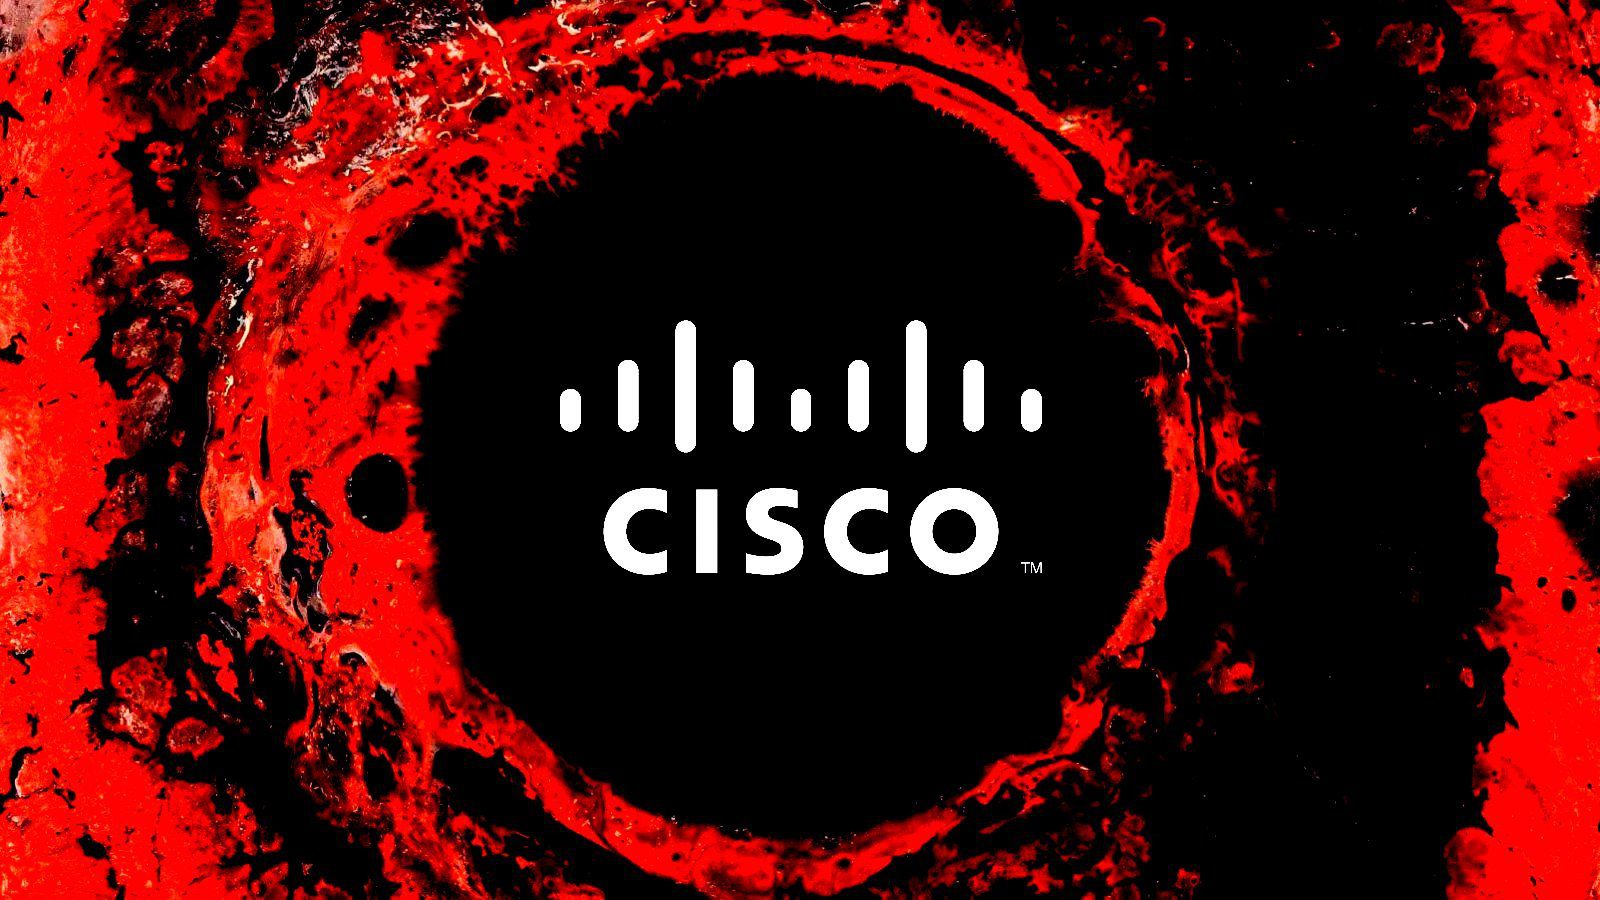 Cisco hacked by Yanluowang ransomware gang, 2.8GB allegedly stolen